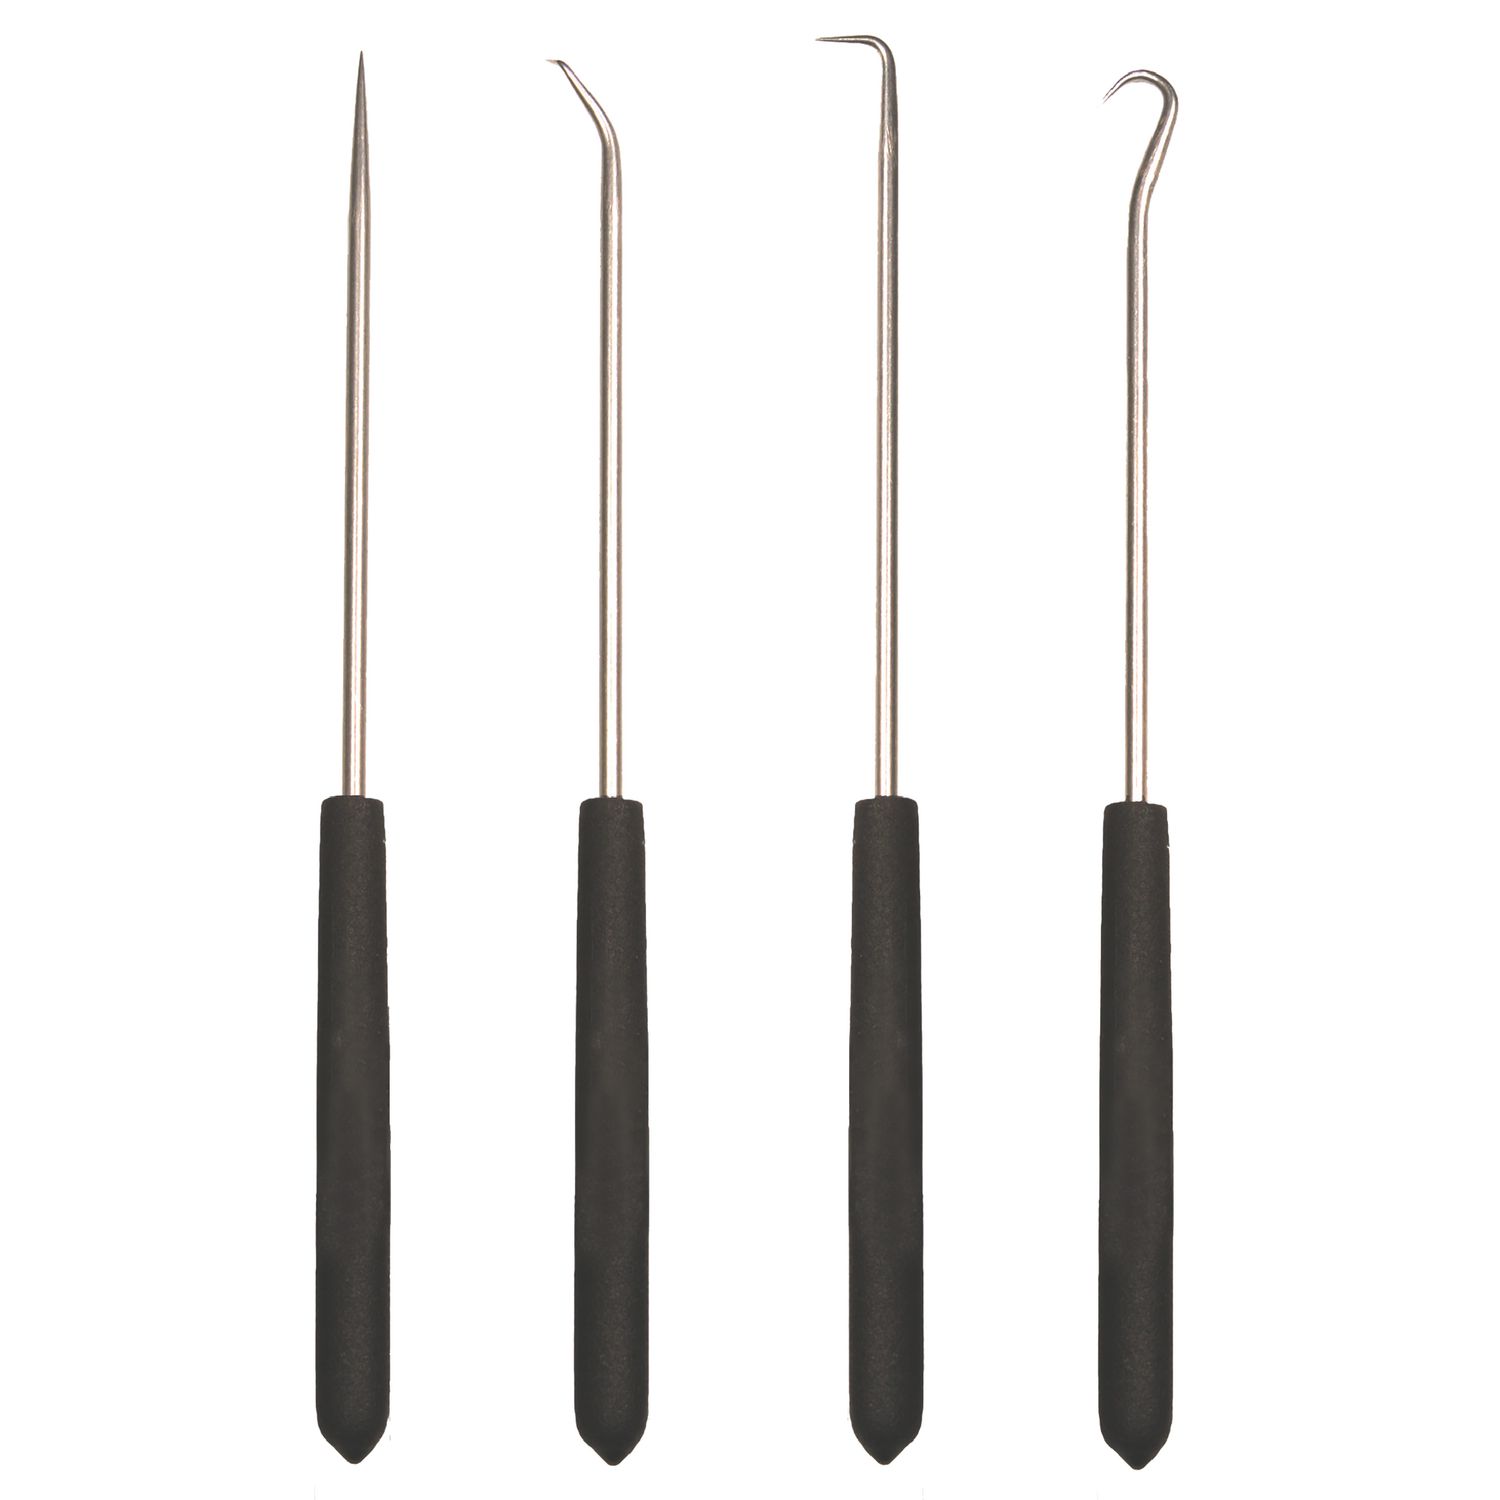 4 PIECE HOOK AND PICK SET WITH CUSHION GRIP CHP4